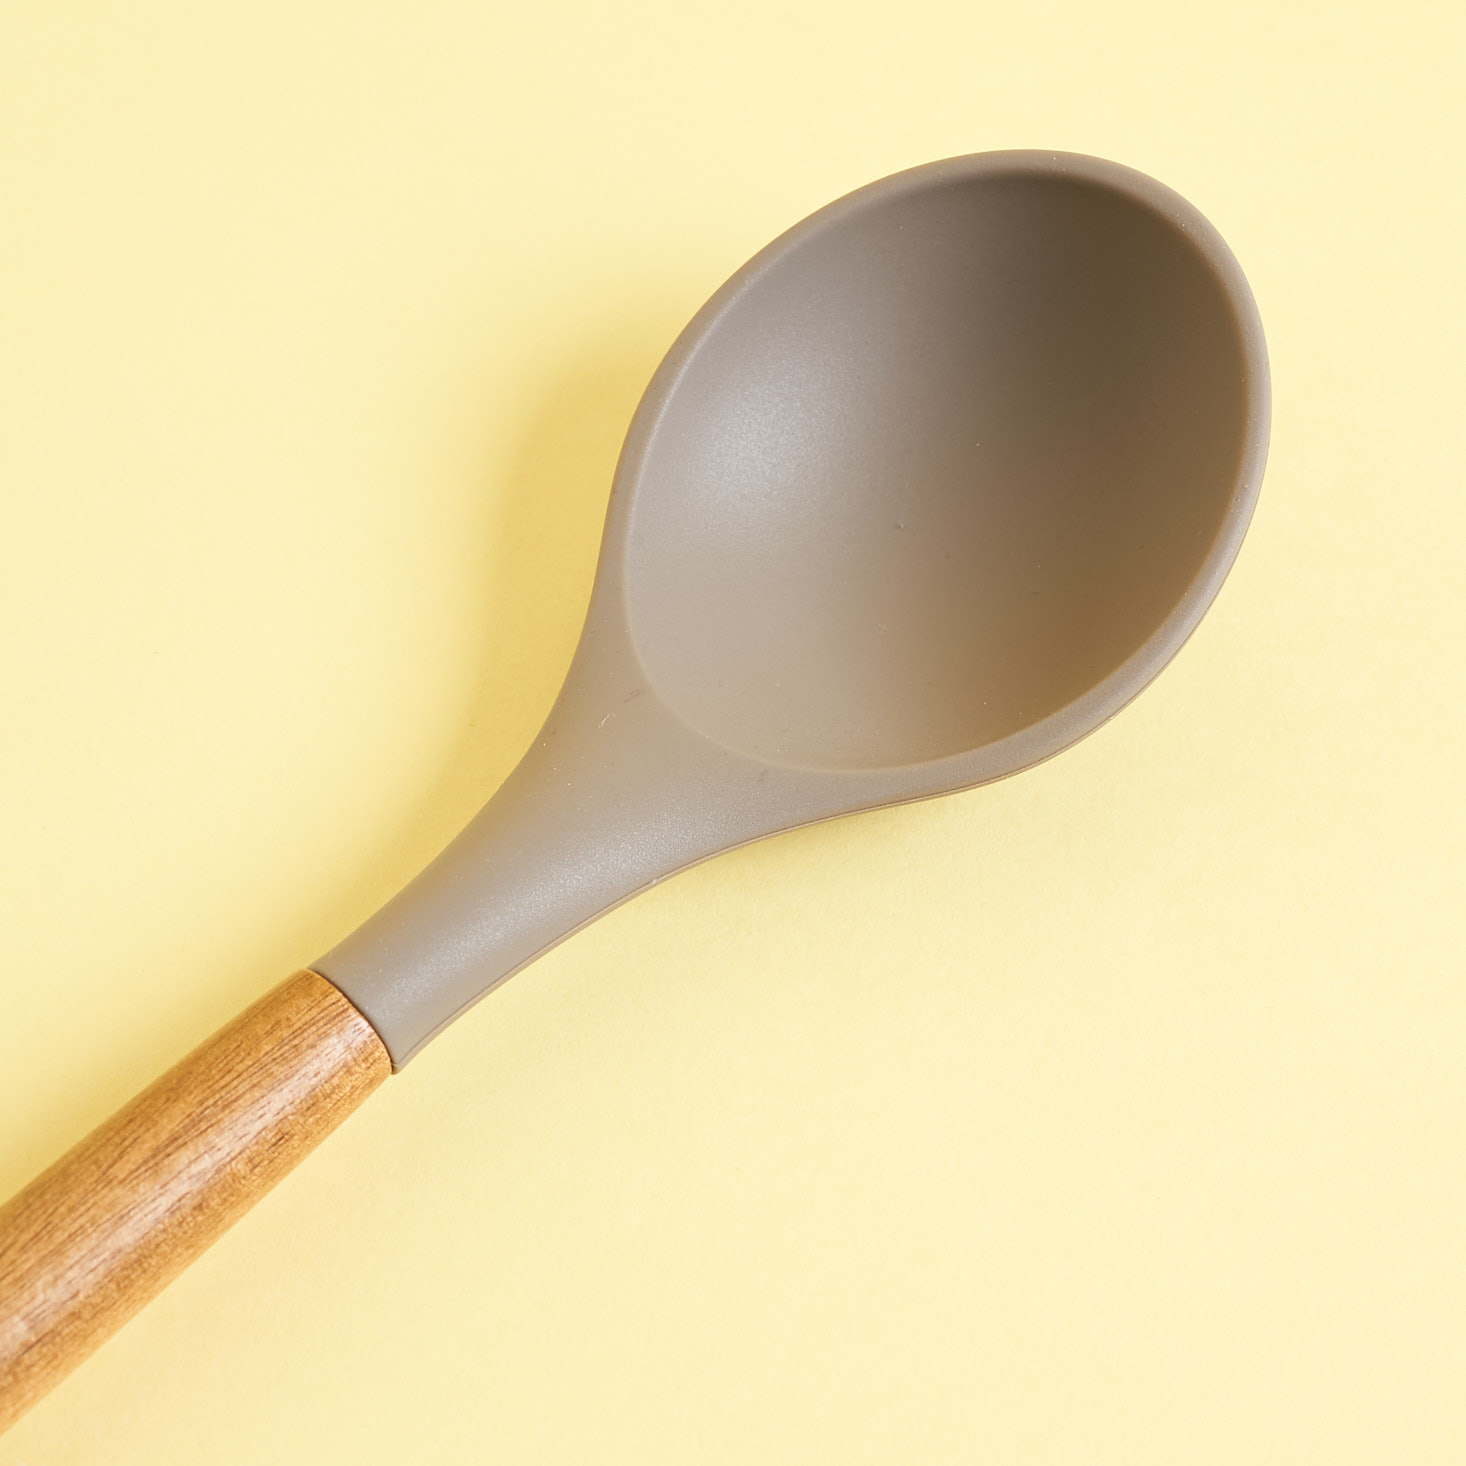 Brandless Silicone Serving Spoon